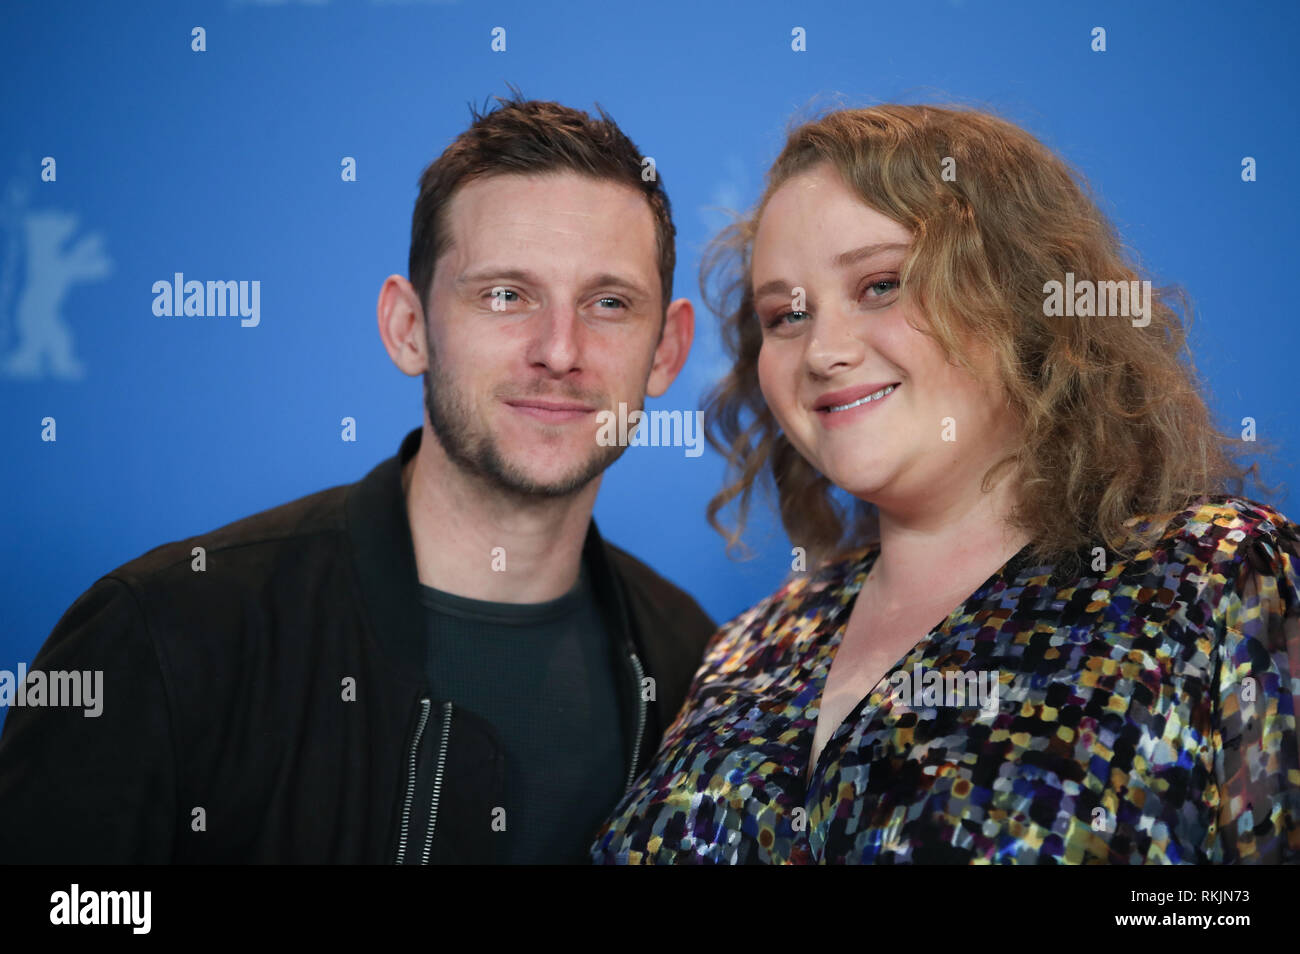 Berlin, Germany. 11th Feb, 2019. 69th Berlinale, Photocall 'Skin', USA, Panorama: Jamie Bell, British actor stands next to Danielle Macdonald, actress. Credit: Christof Soeder/dpa/Alamy Live News Stock Photo